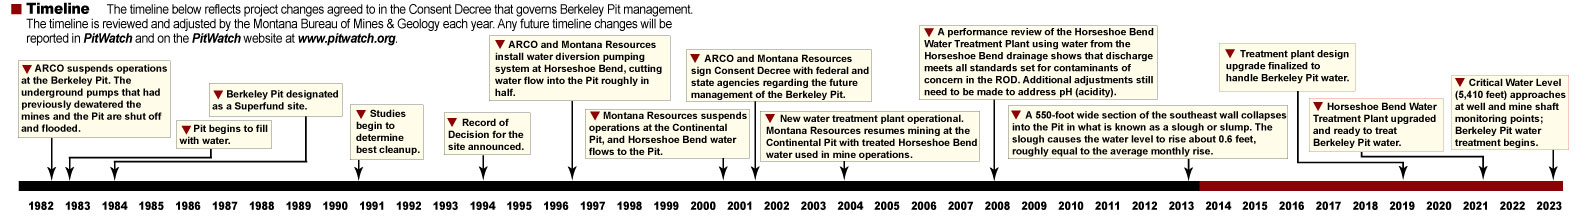 This timeline reflects project changes agreed to in the Consent Decree that governs Berkeley Pit management. The timeline is reviewed and adjusted by the Montana Bureau of Mines & Geology each year. Any future timeline changes will be reported in PitWatch and on the PitWatch website at www.pitwatch.org. Graphic by Justin Ringsak.